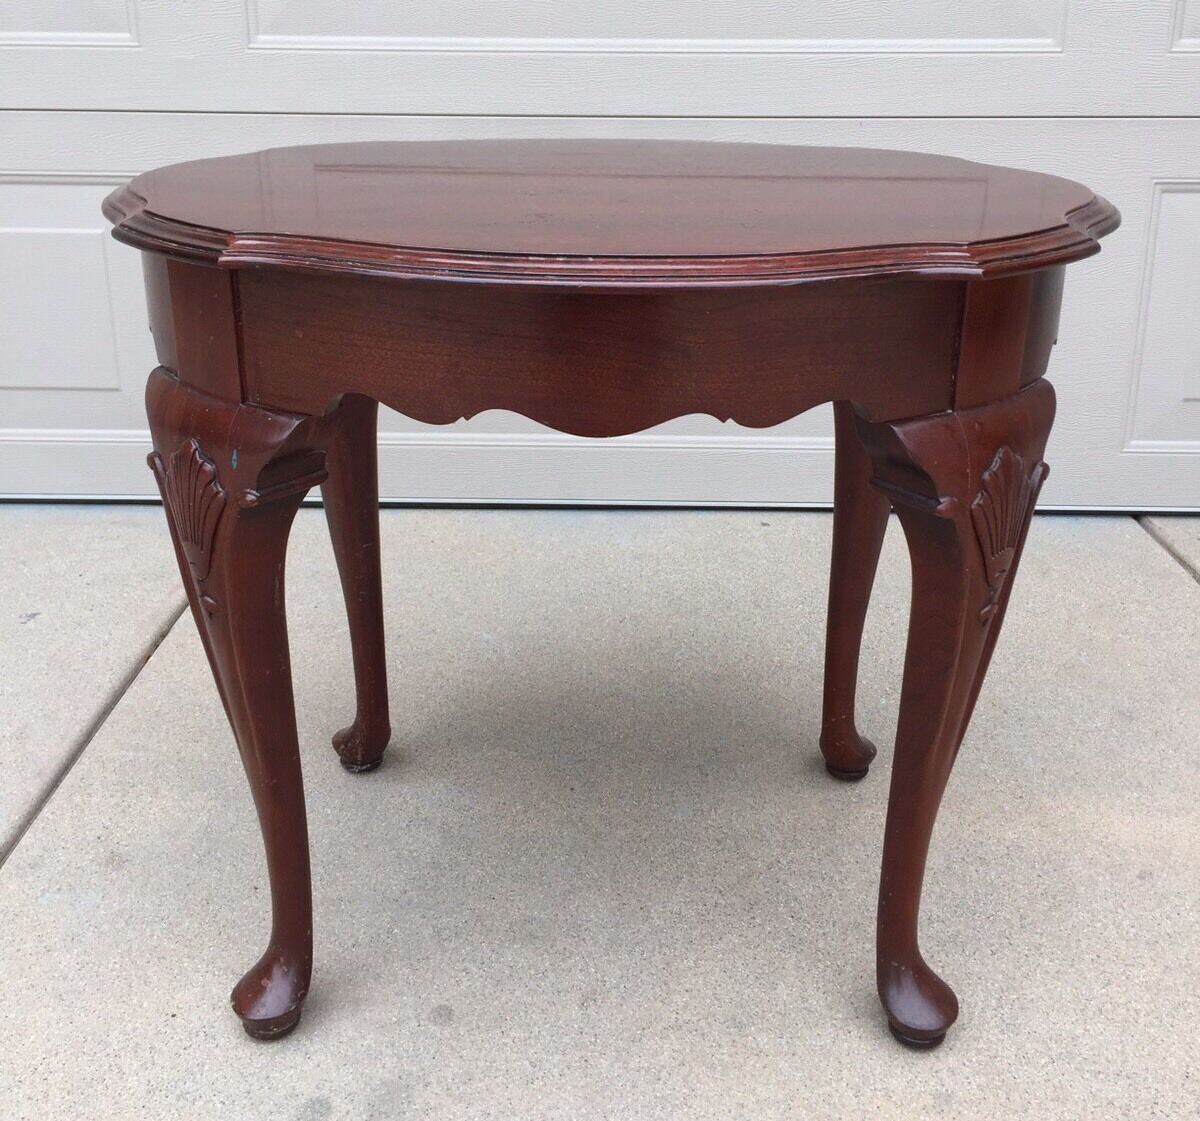 ethan allen used furniture for tips end tables craigslist accent table court cherry wood wooden row hours power chairside light coffee sets ashley flyer liberty village pipe